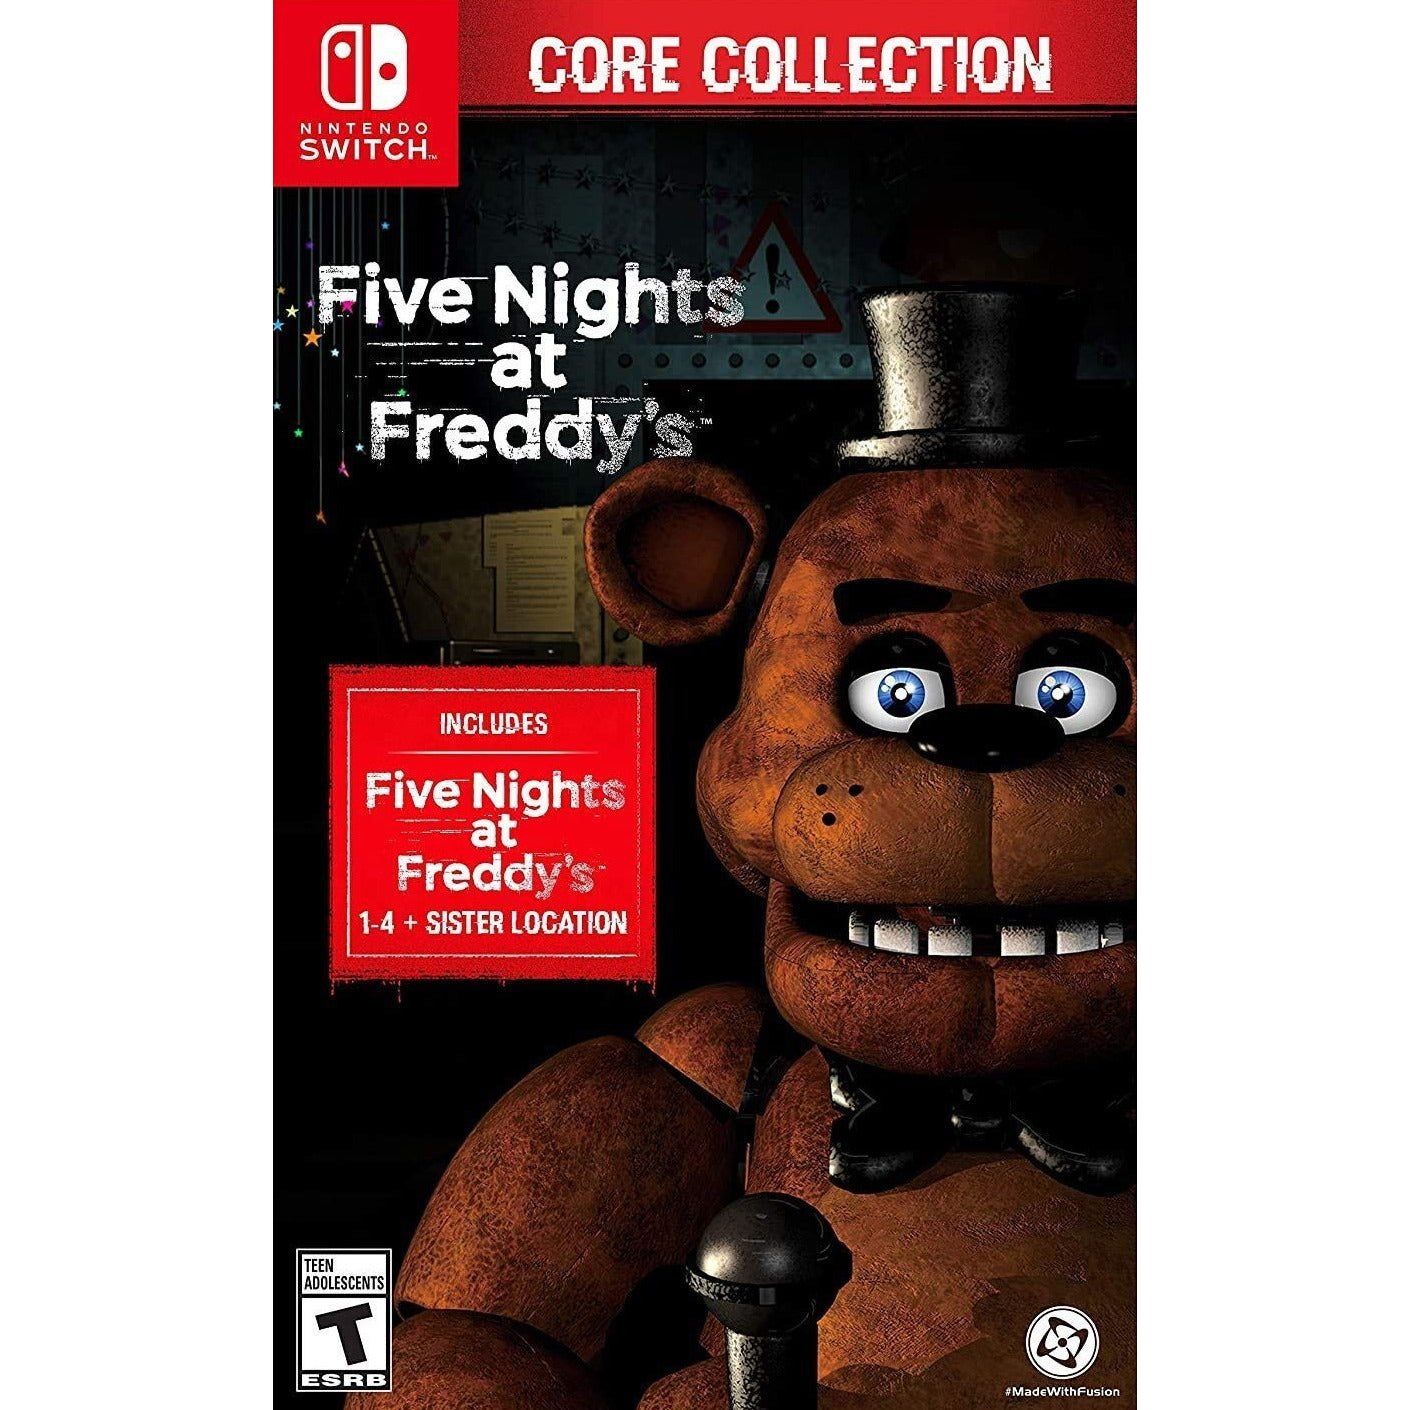 Switch - Five Nights at Freddy's Core Collection (In Case)